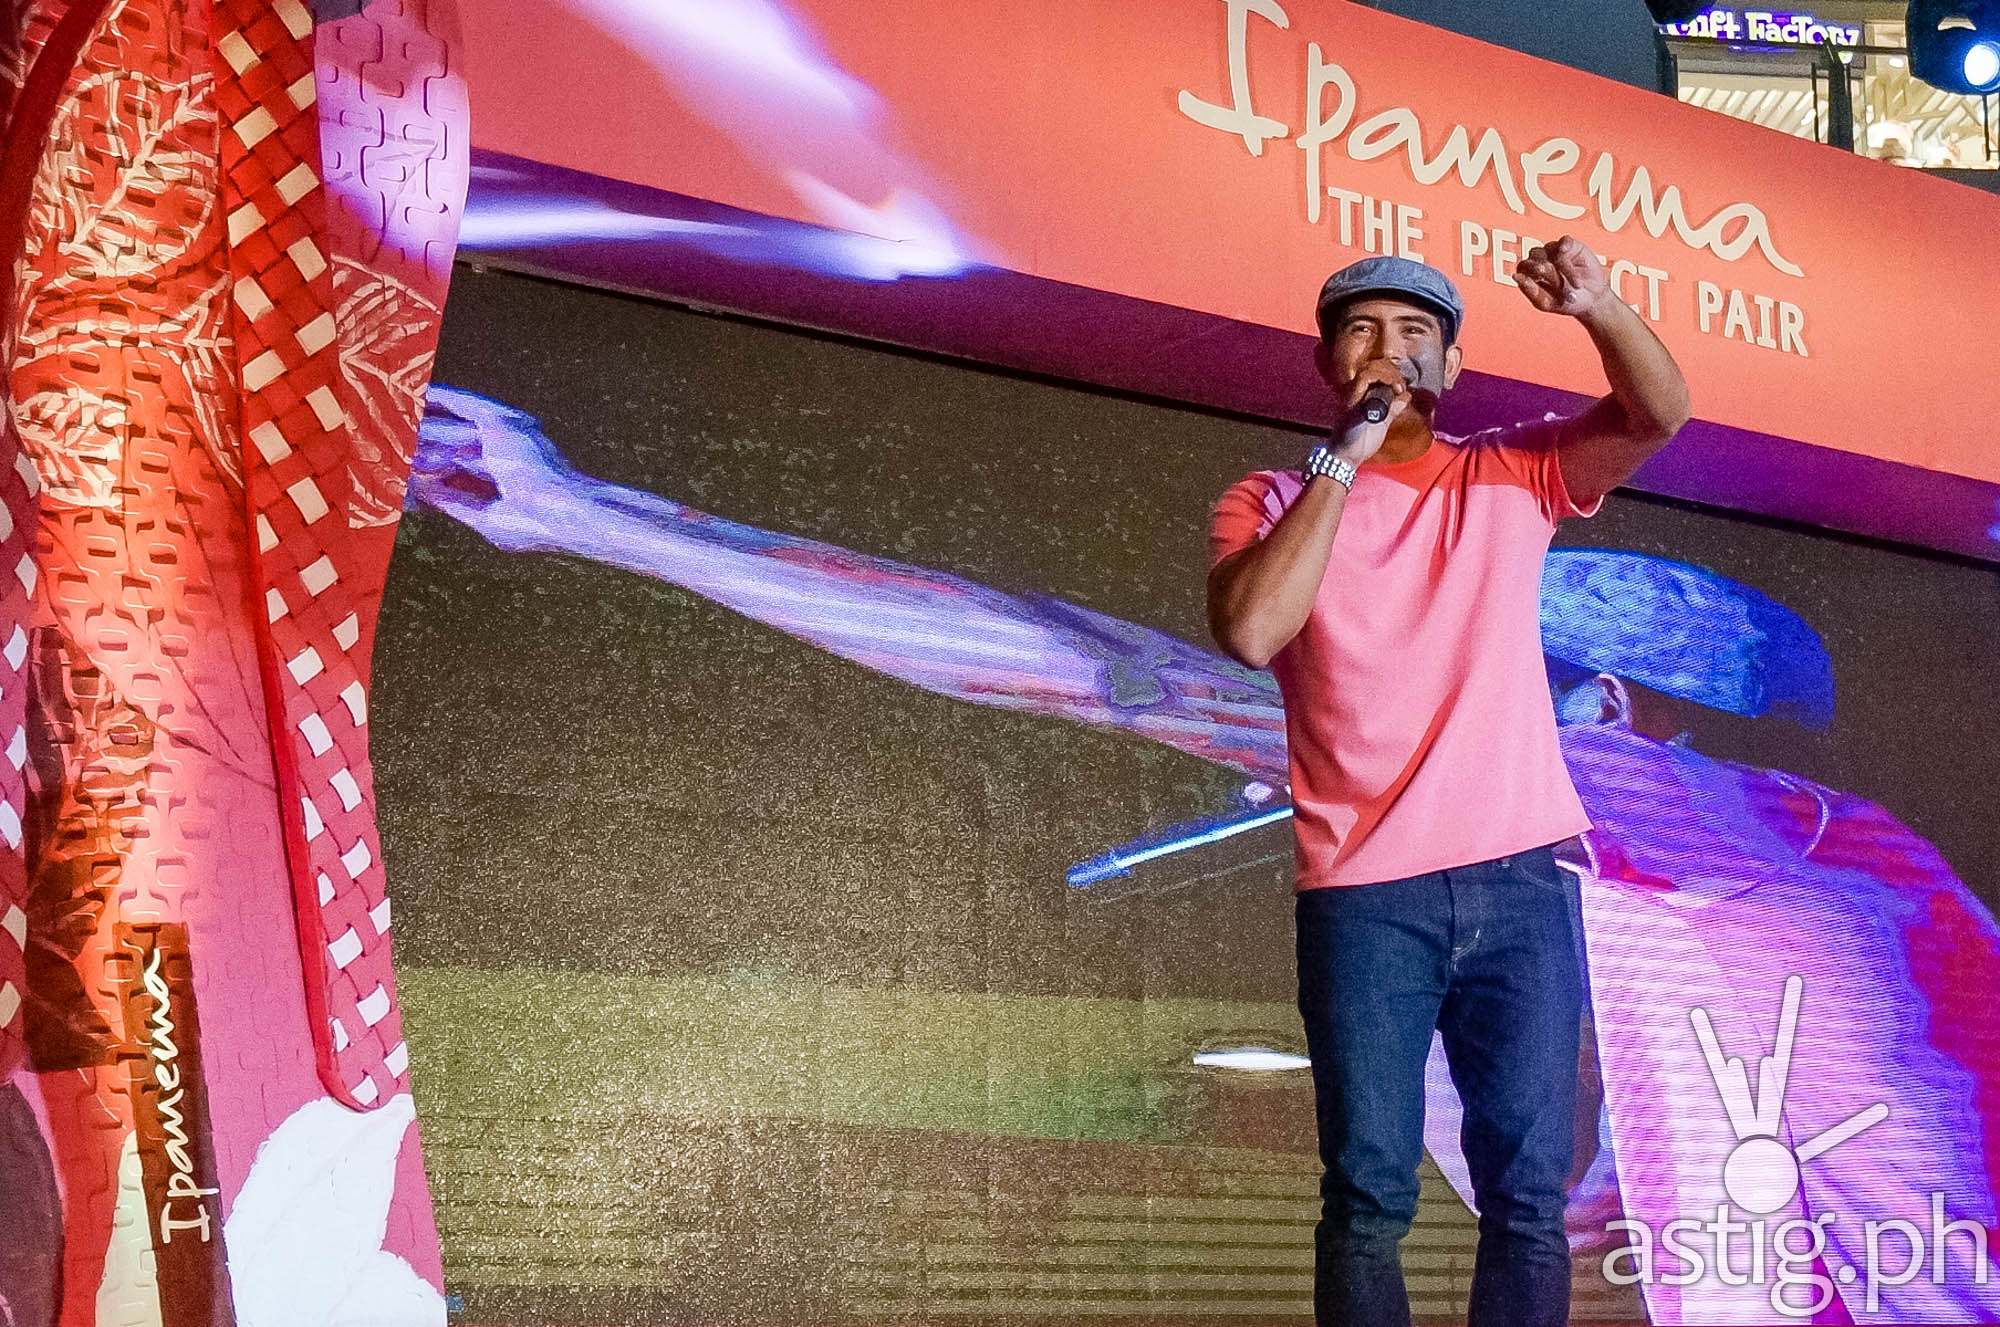 Gerald Anderson at Ipanema Perfect Pair event